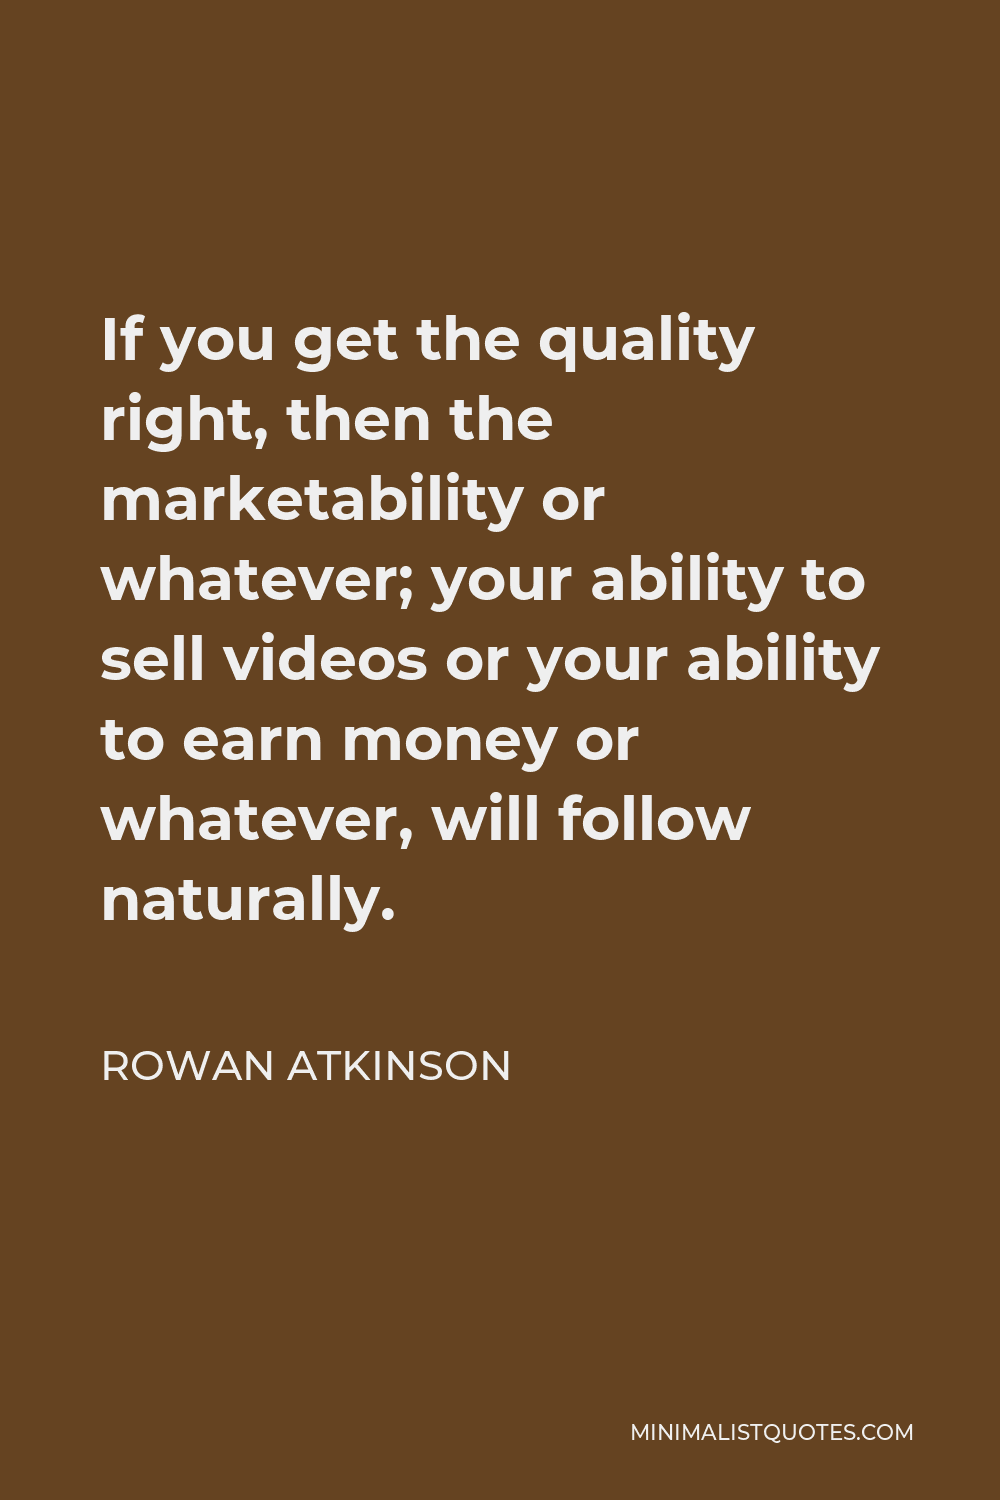 Rowan Atkinson Quote - If you get the quality right, then the marketability or whatever; your ability to sell videos or your ability to earn money or whatever, will follow naturally.